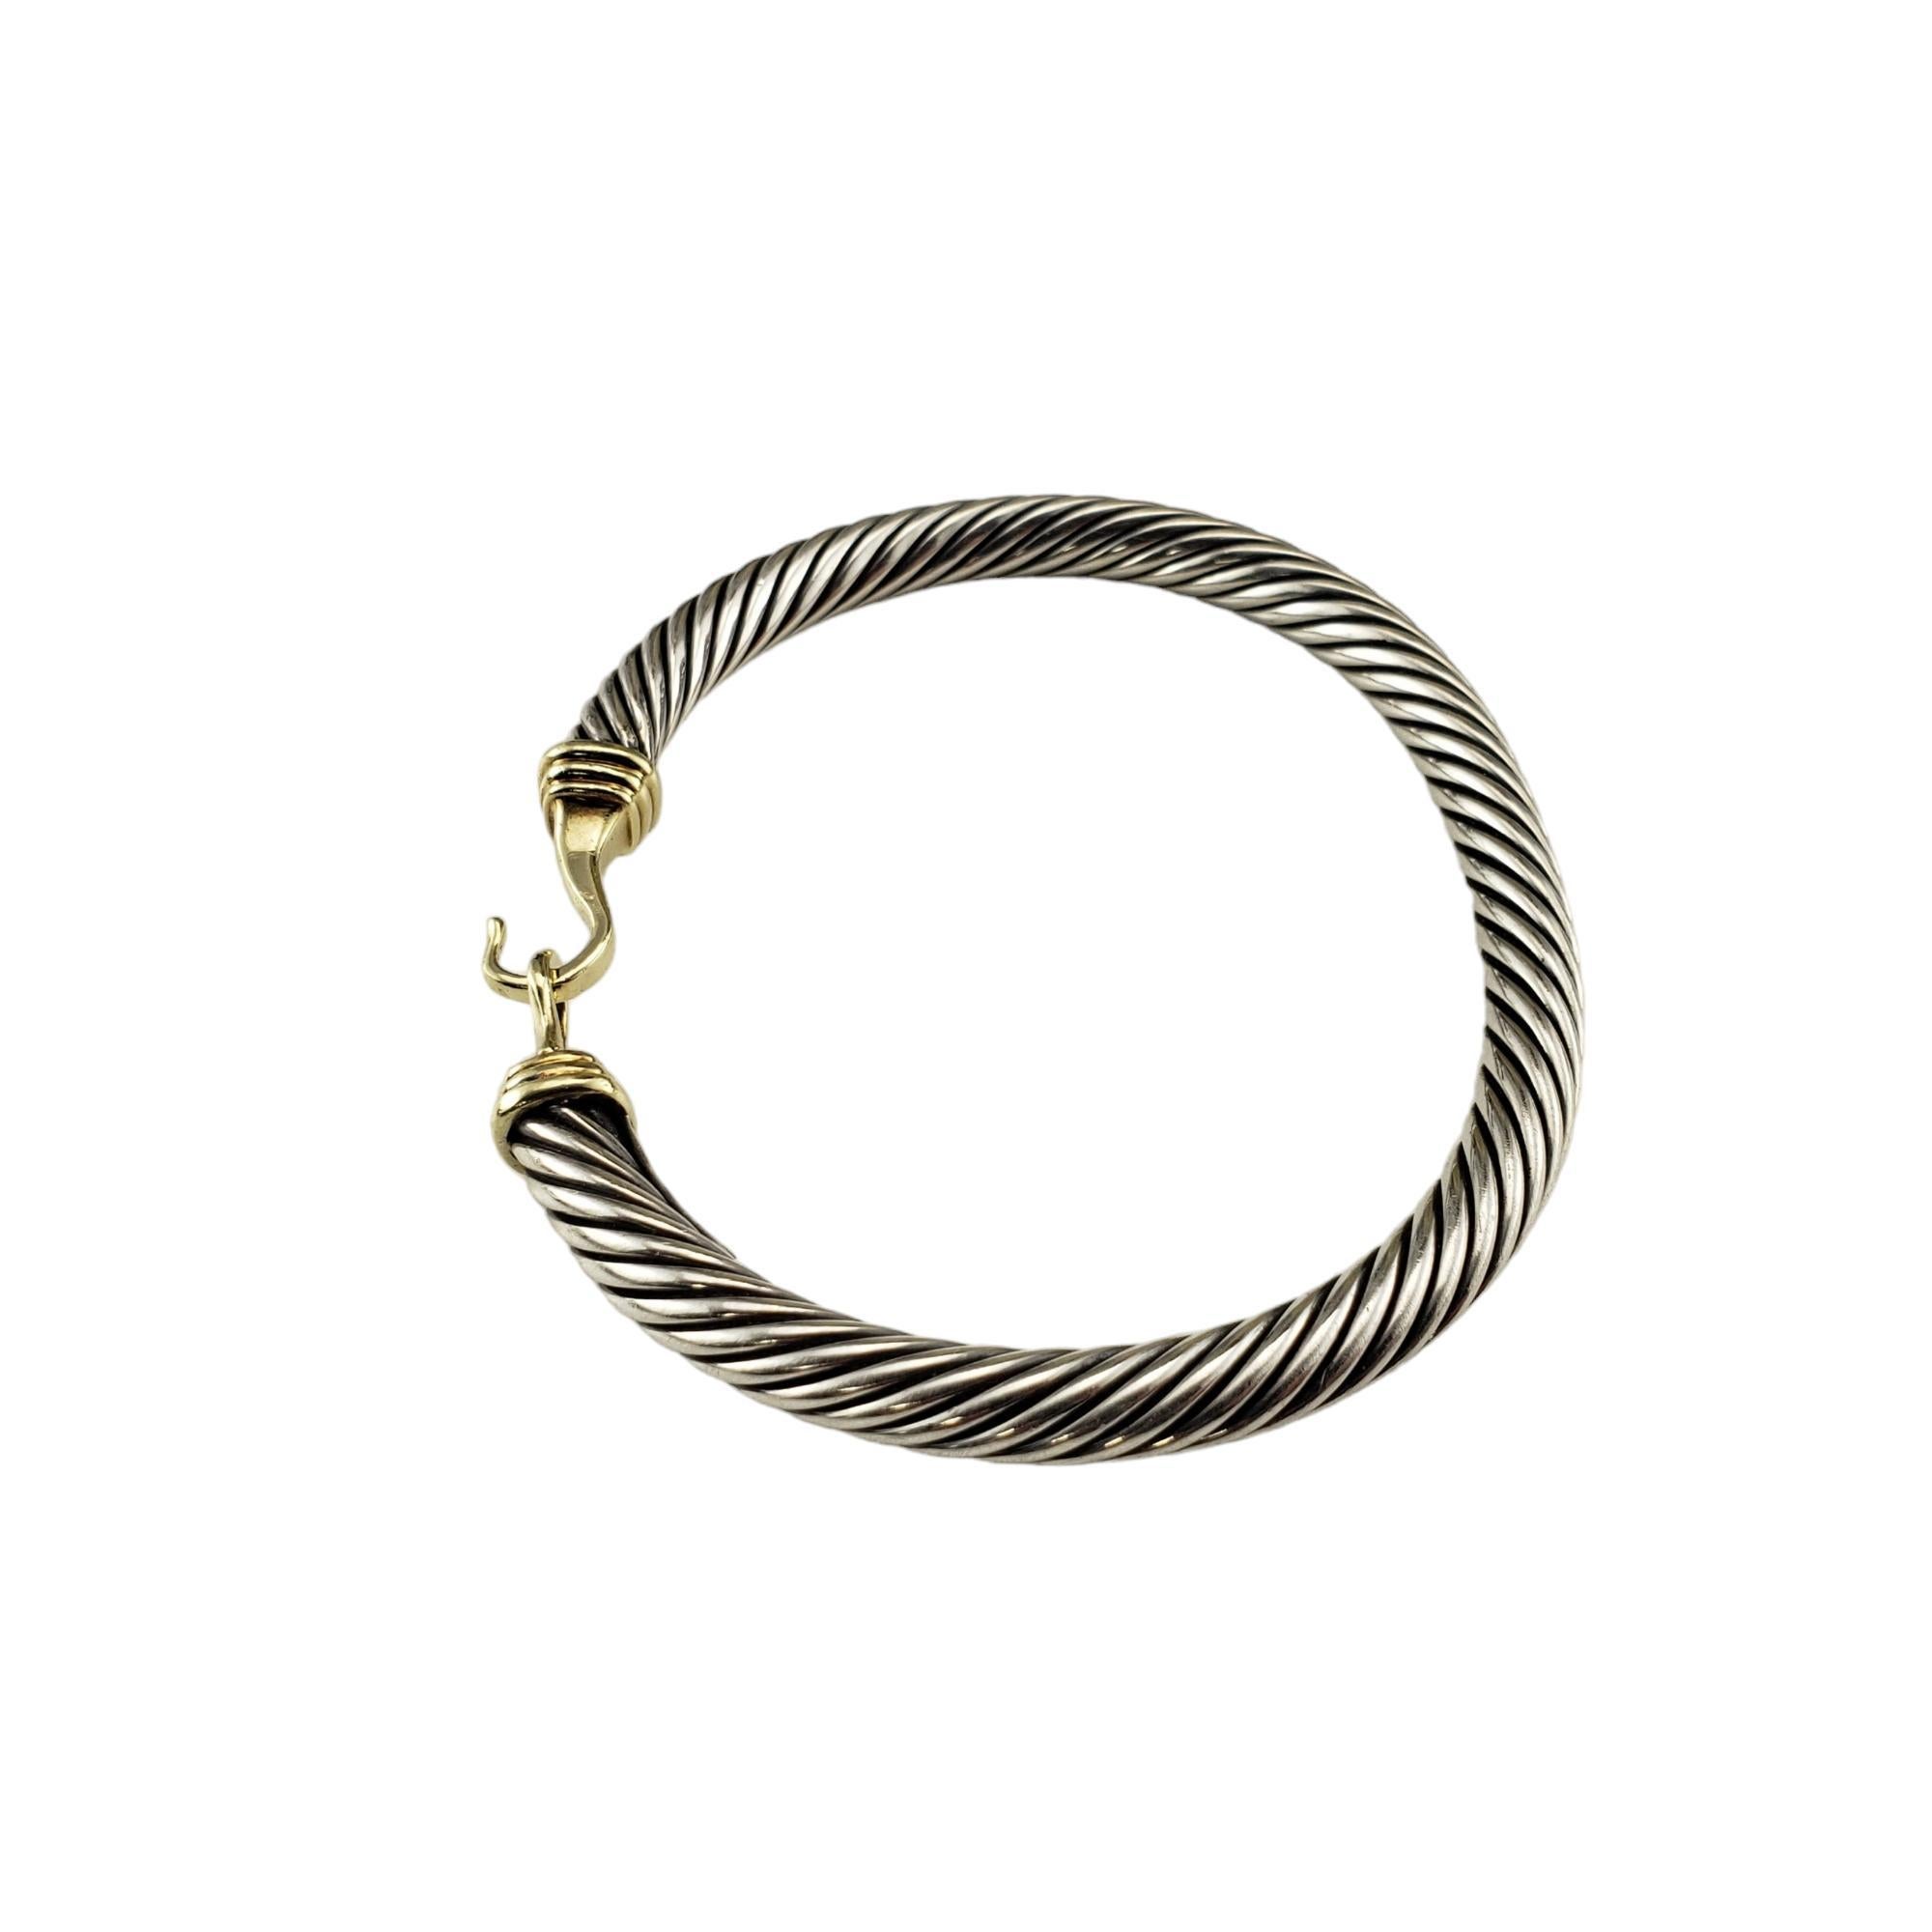 David Yurman Sterling Silver and 14K Yellow Gold Cable Buckle Bracelet

This elegant cable buckle bracelet by David Yurman is crafted in beautifully detailed sterling silver and 14K yellow gold.  

Width: 5 mm.

Size: 6.5 inches

Hallmark:  Yurman